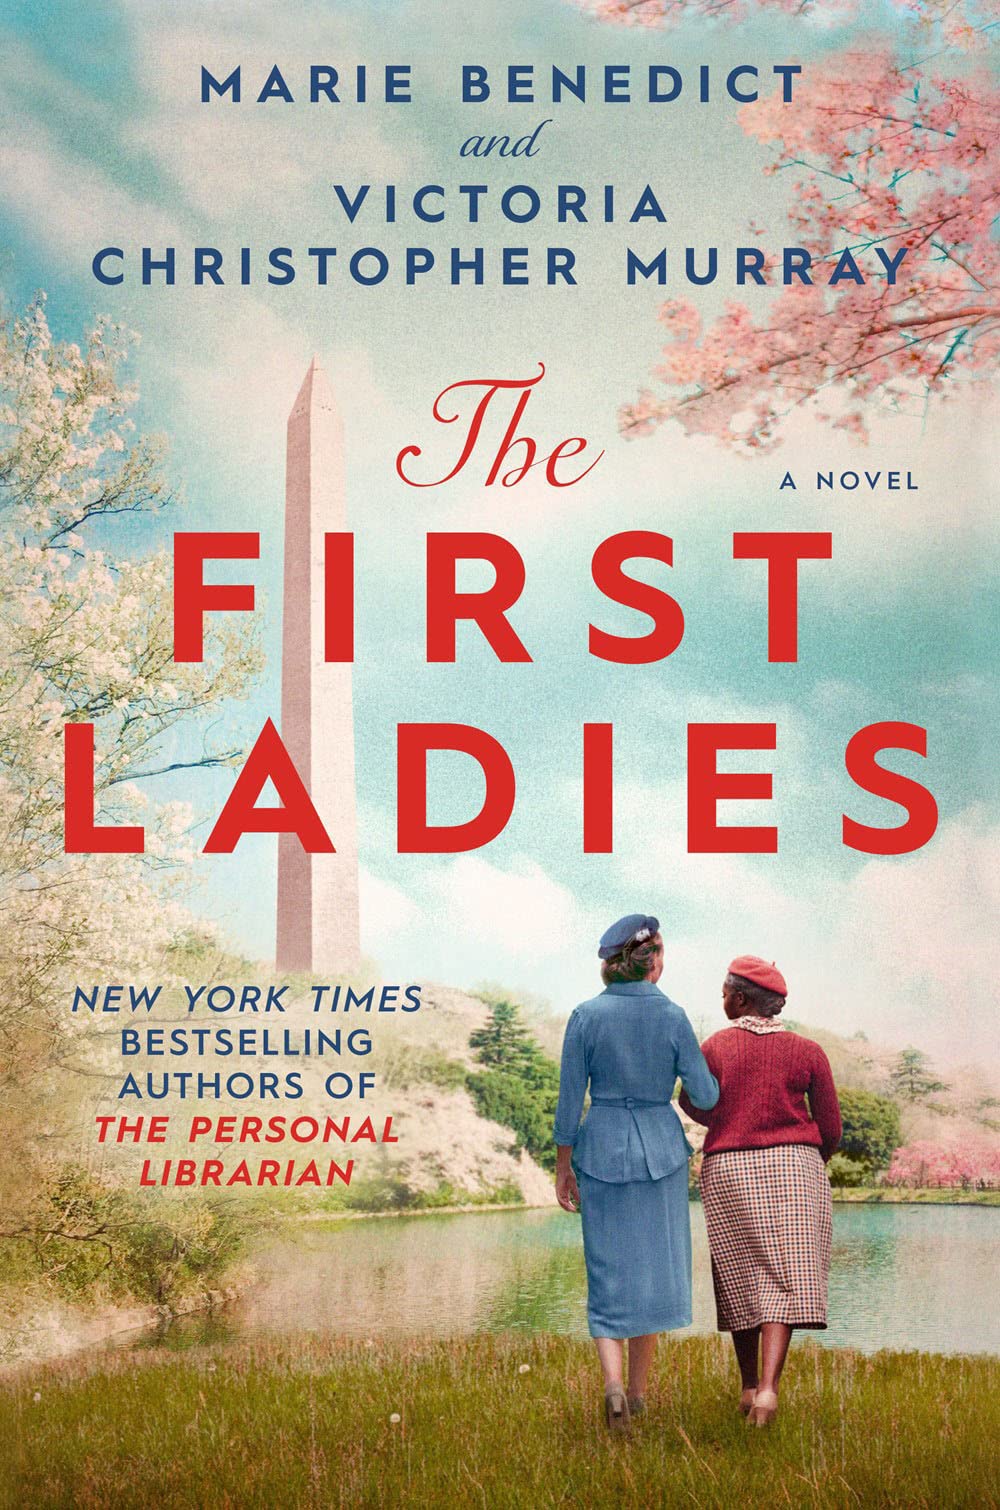 Image for "The First Ladies"